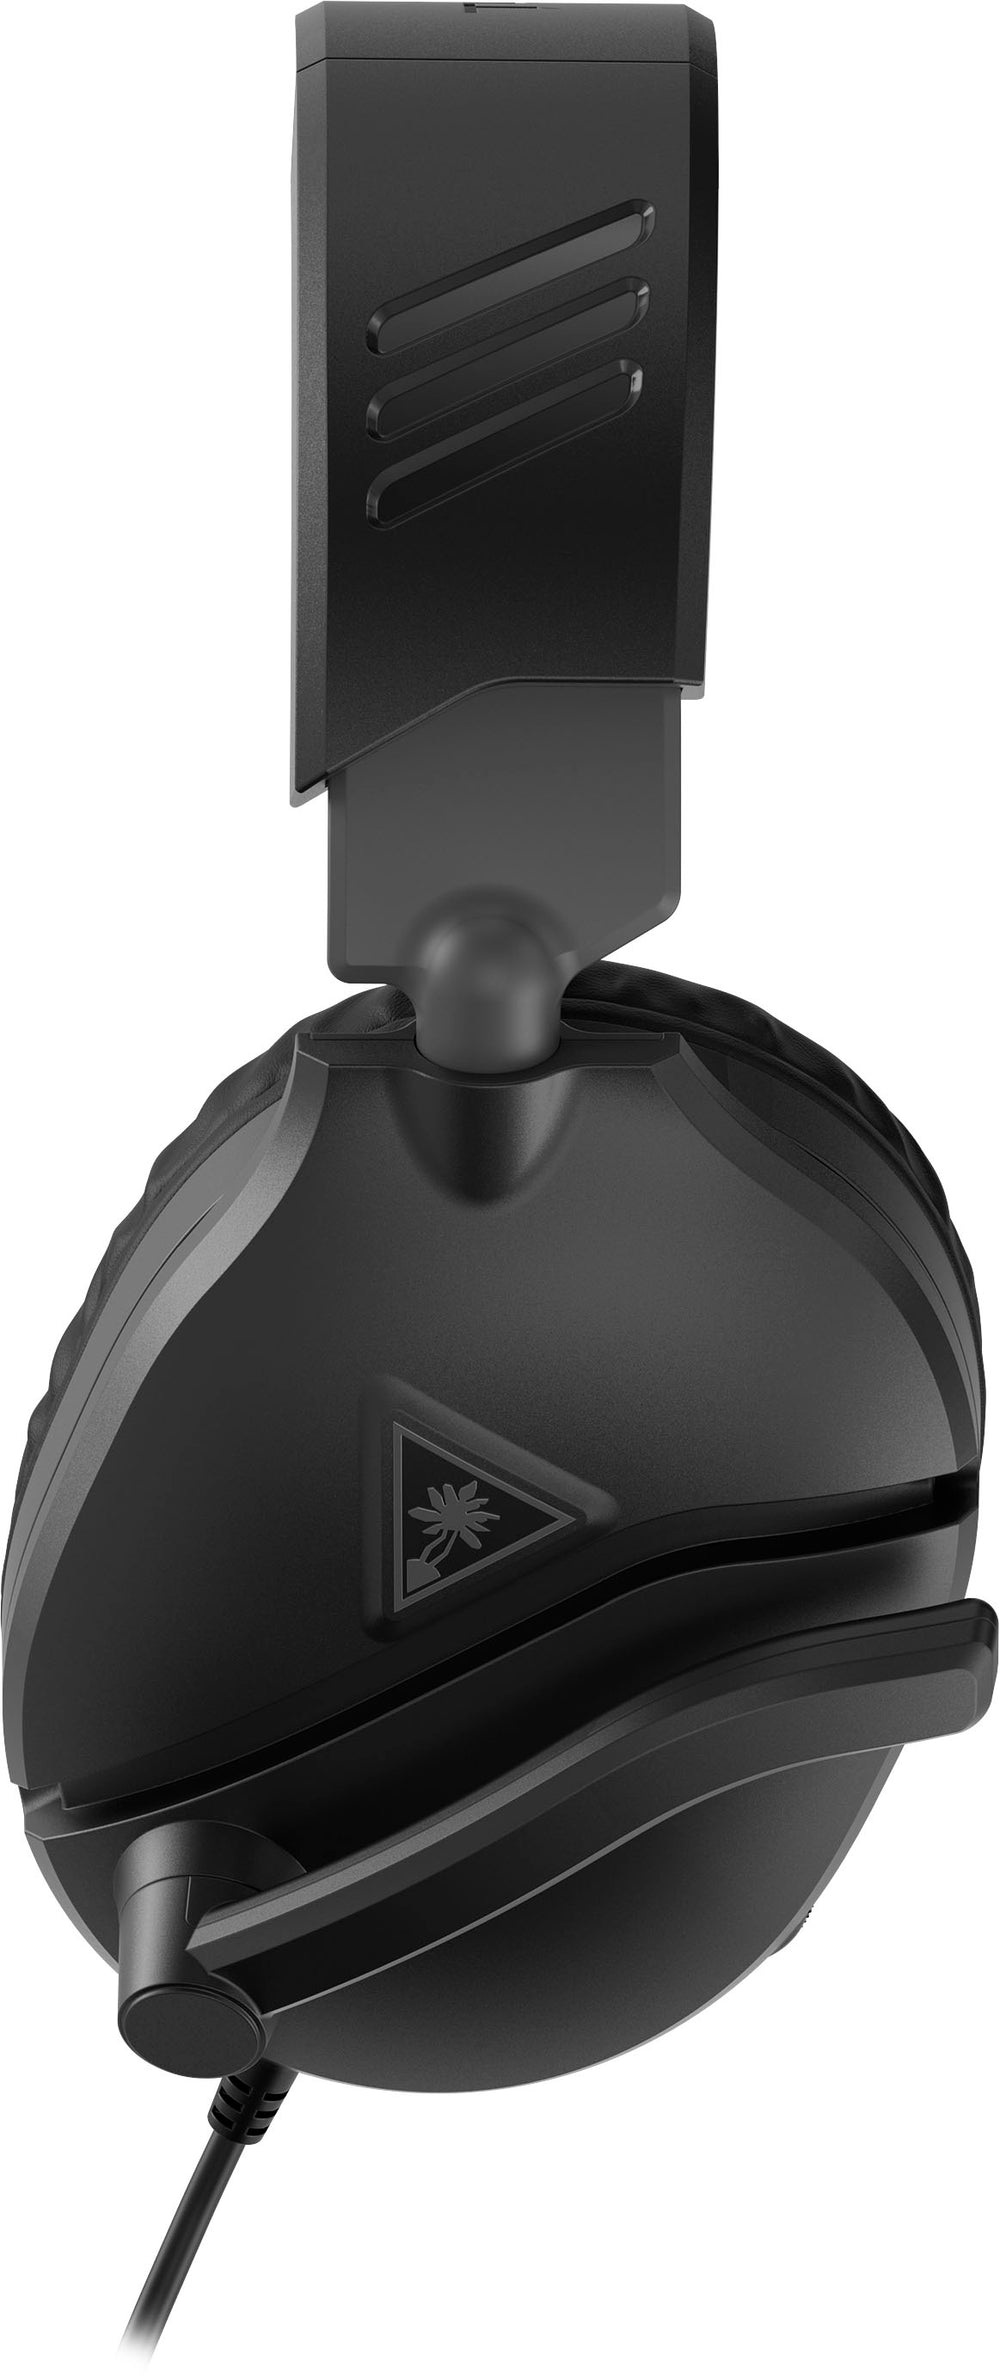 Turtle Beach - Recon 70 Gaming Headset for Xbox Series X|S, Xbox One, PS5, PS4, Nintendo Switch, PC & Mobile w 3.5mm Wired Connection - Black_1